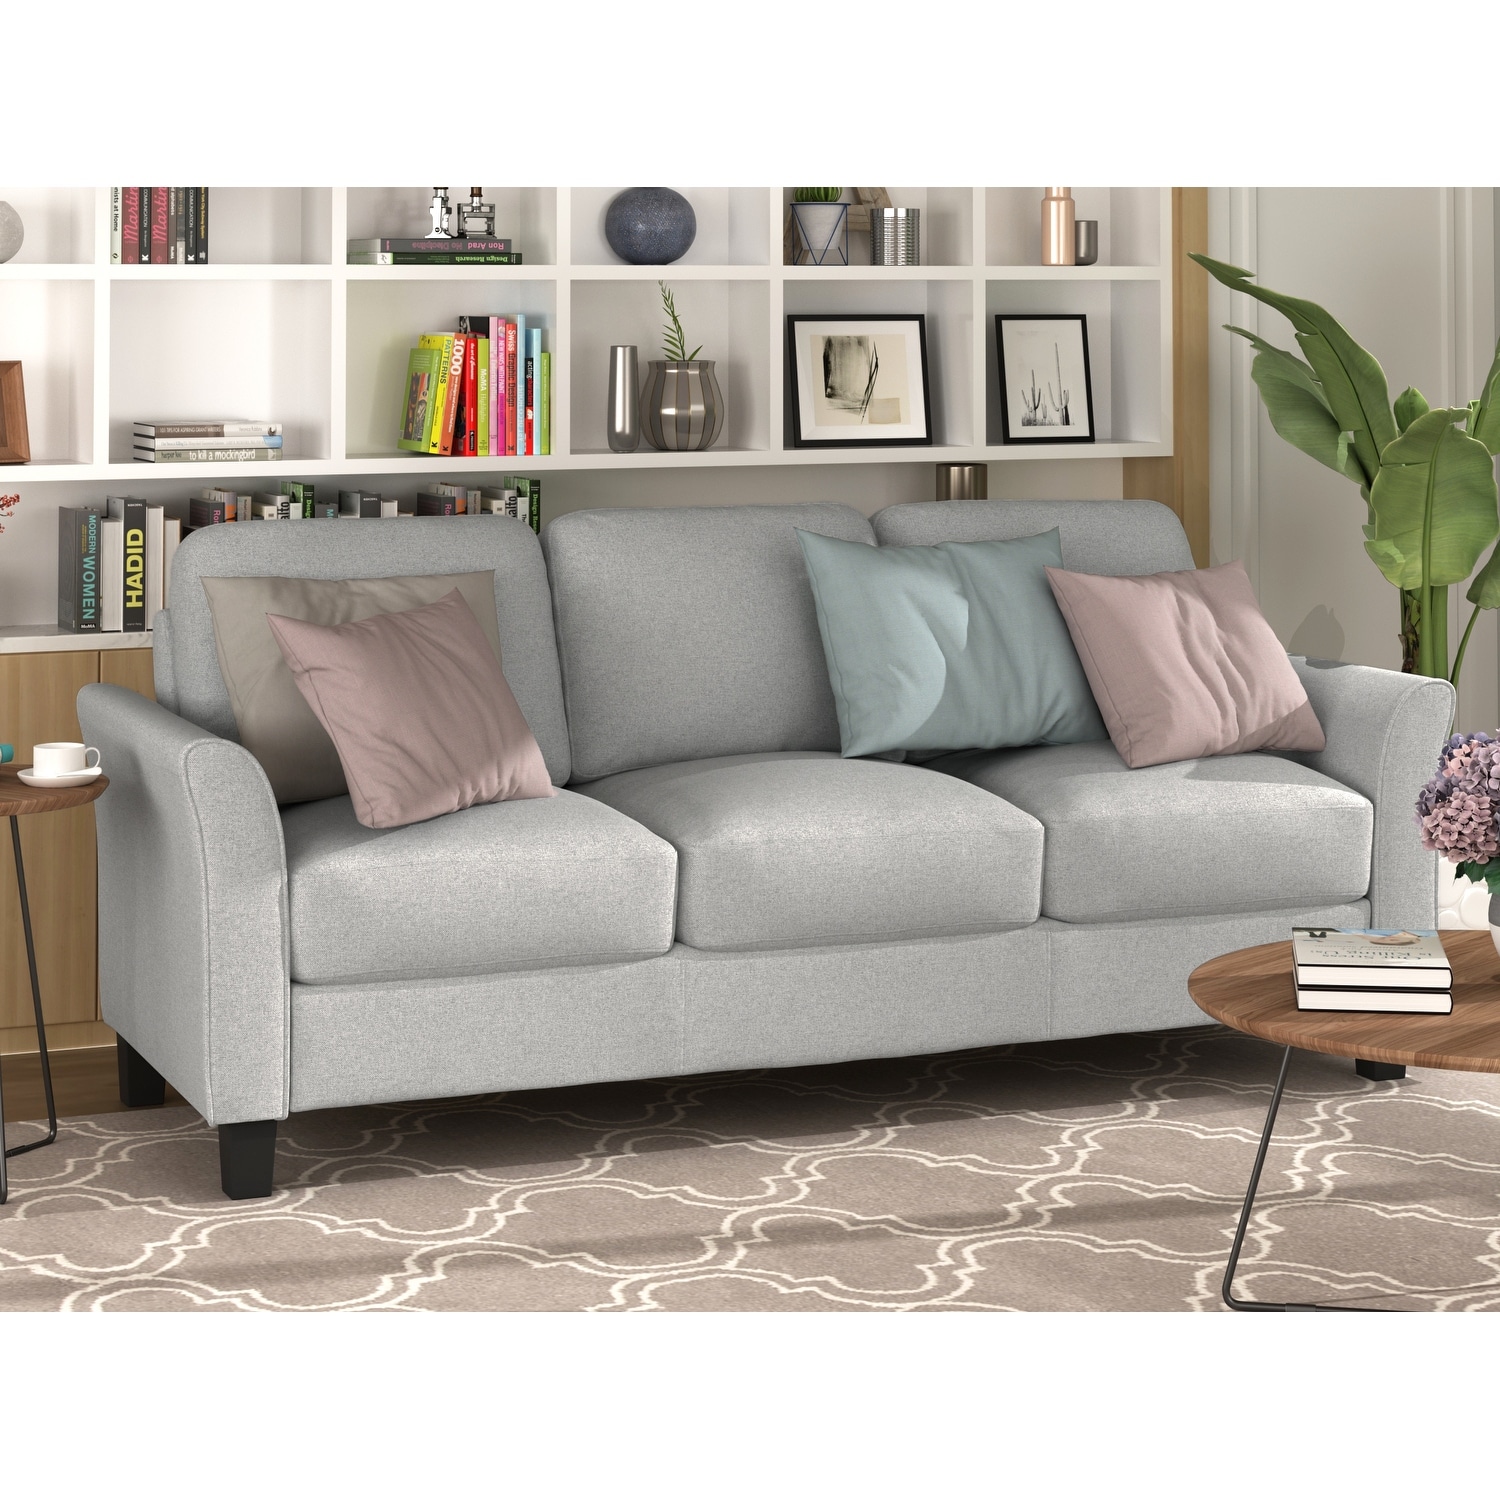 Linen Fabric Upholstered Sofa 3 Seater Removable Back Cushions Couch for  Living Room with Throw Pillows and Square Arms - Bed Bath & Beyond -  38427881